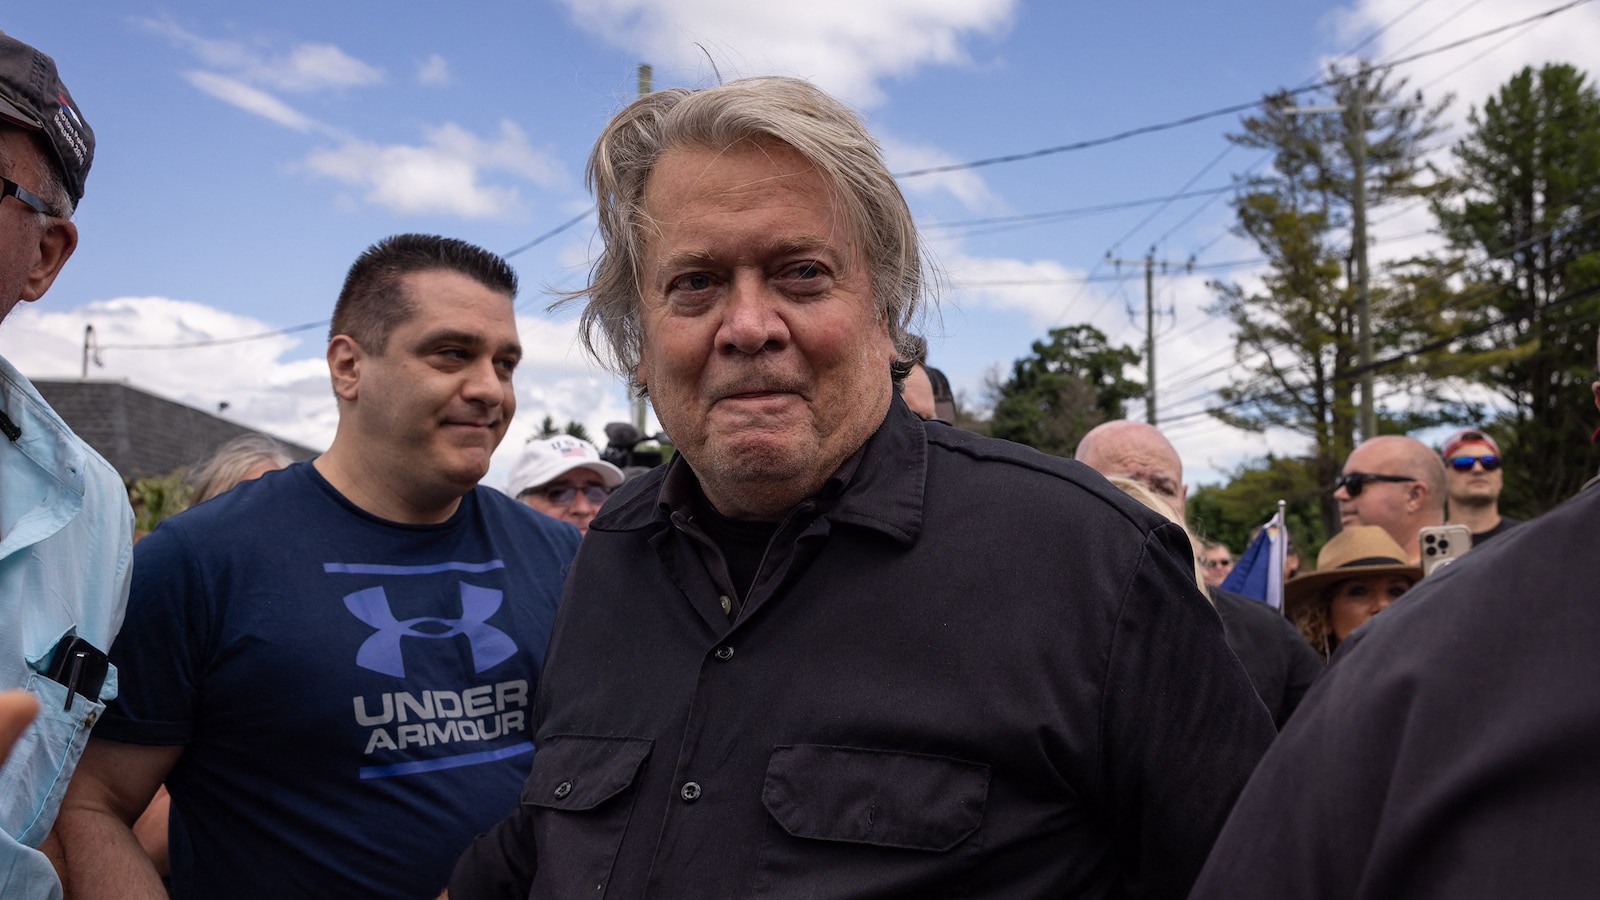 Steve Bannon to go on trial in December for alleged fraud in We Build the Wall fundraiser